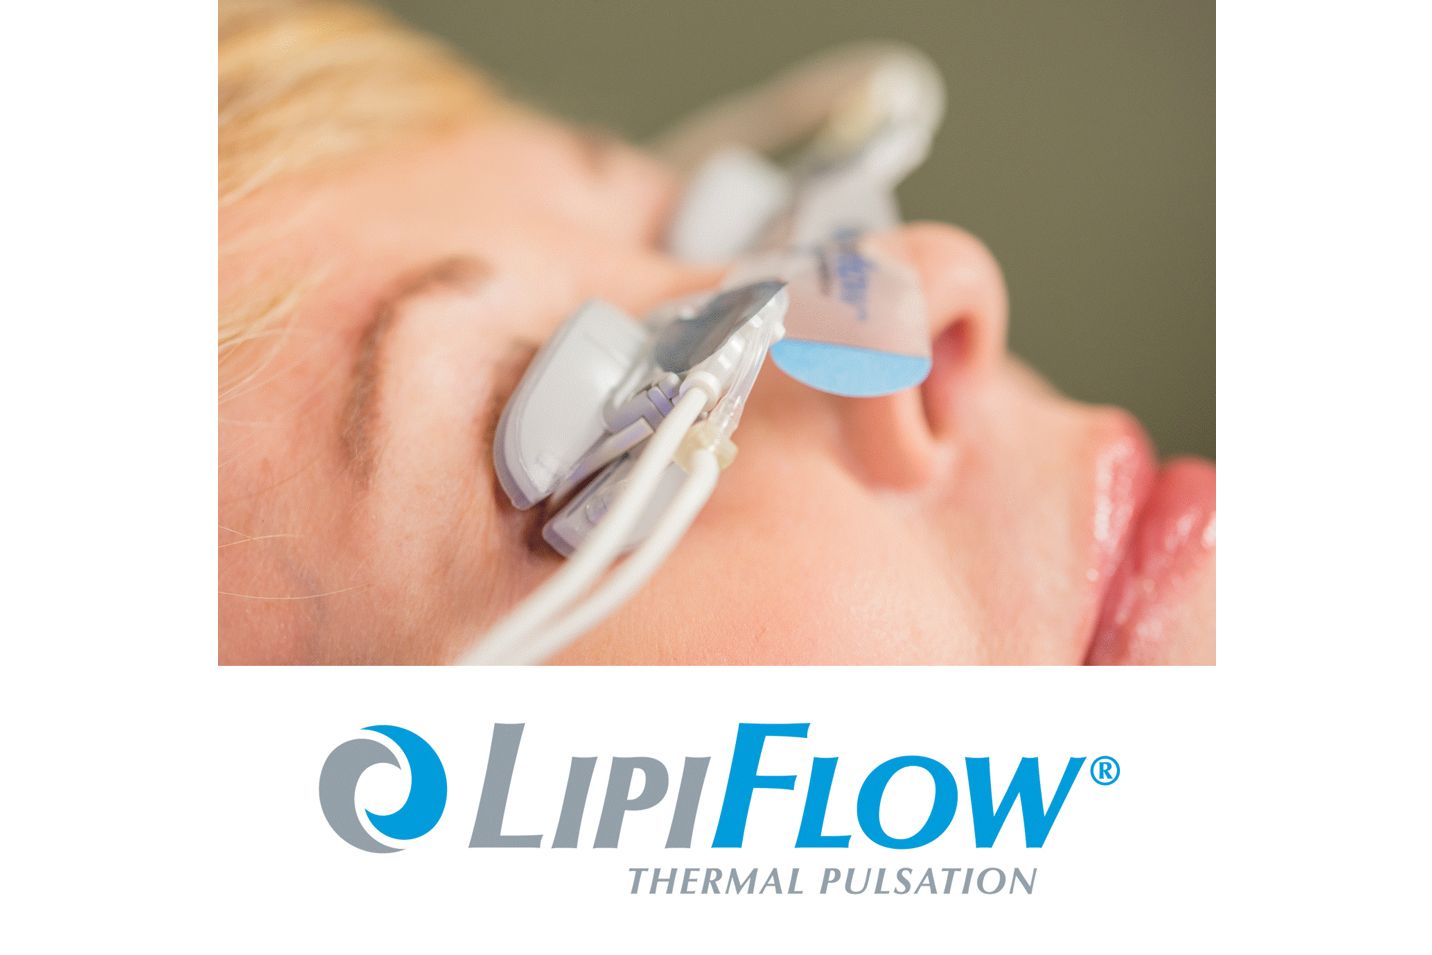 A woman is getting a lipiflow treatment on her face